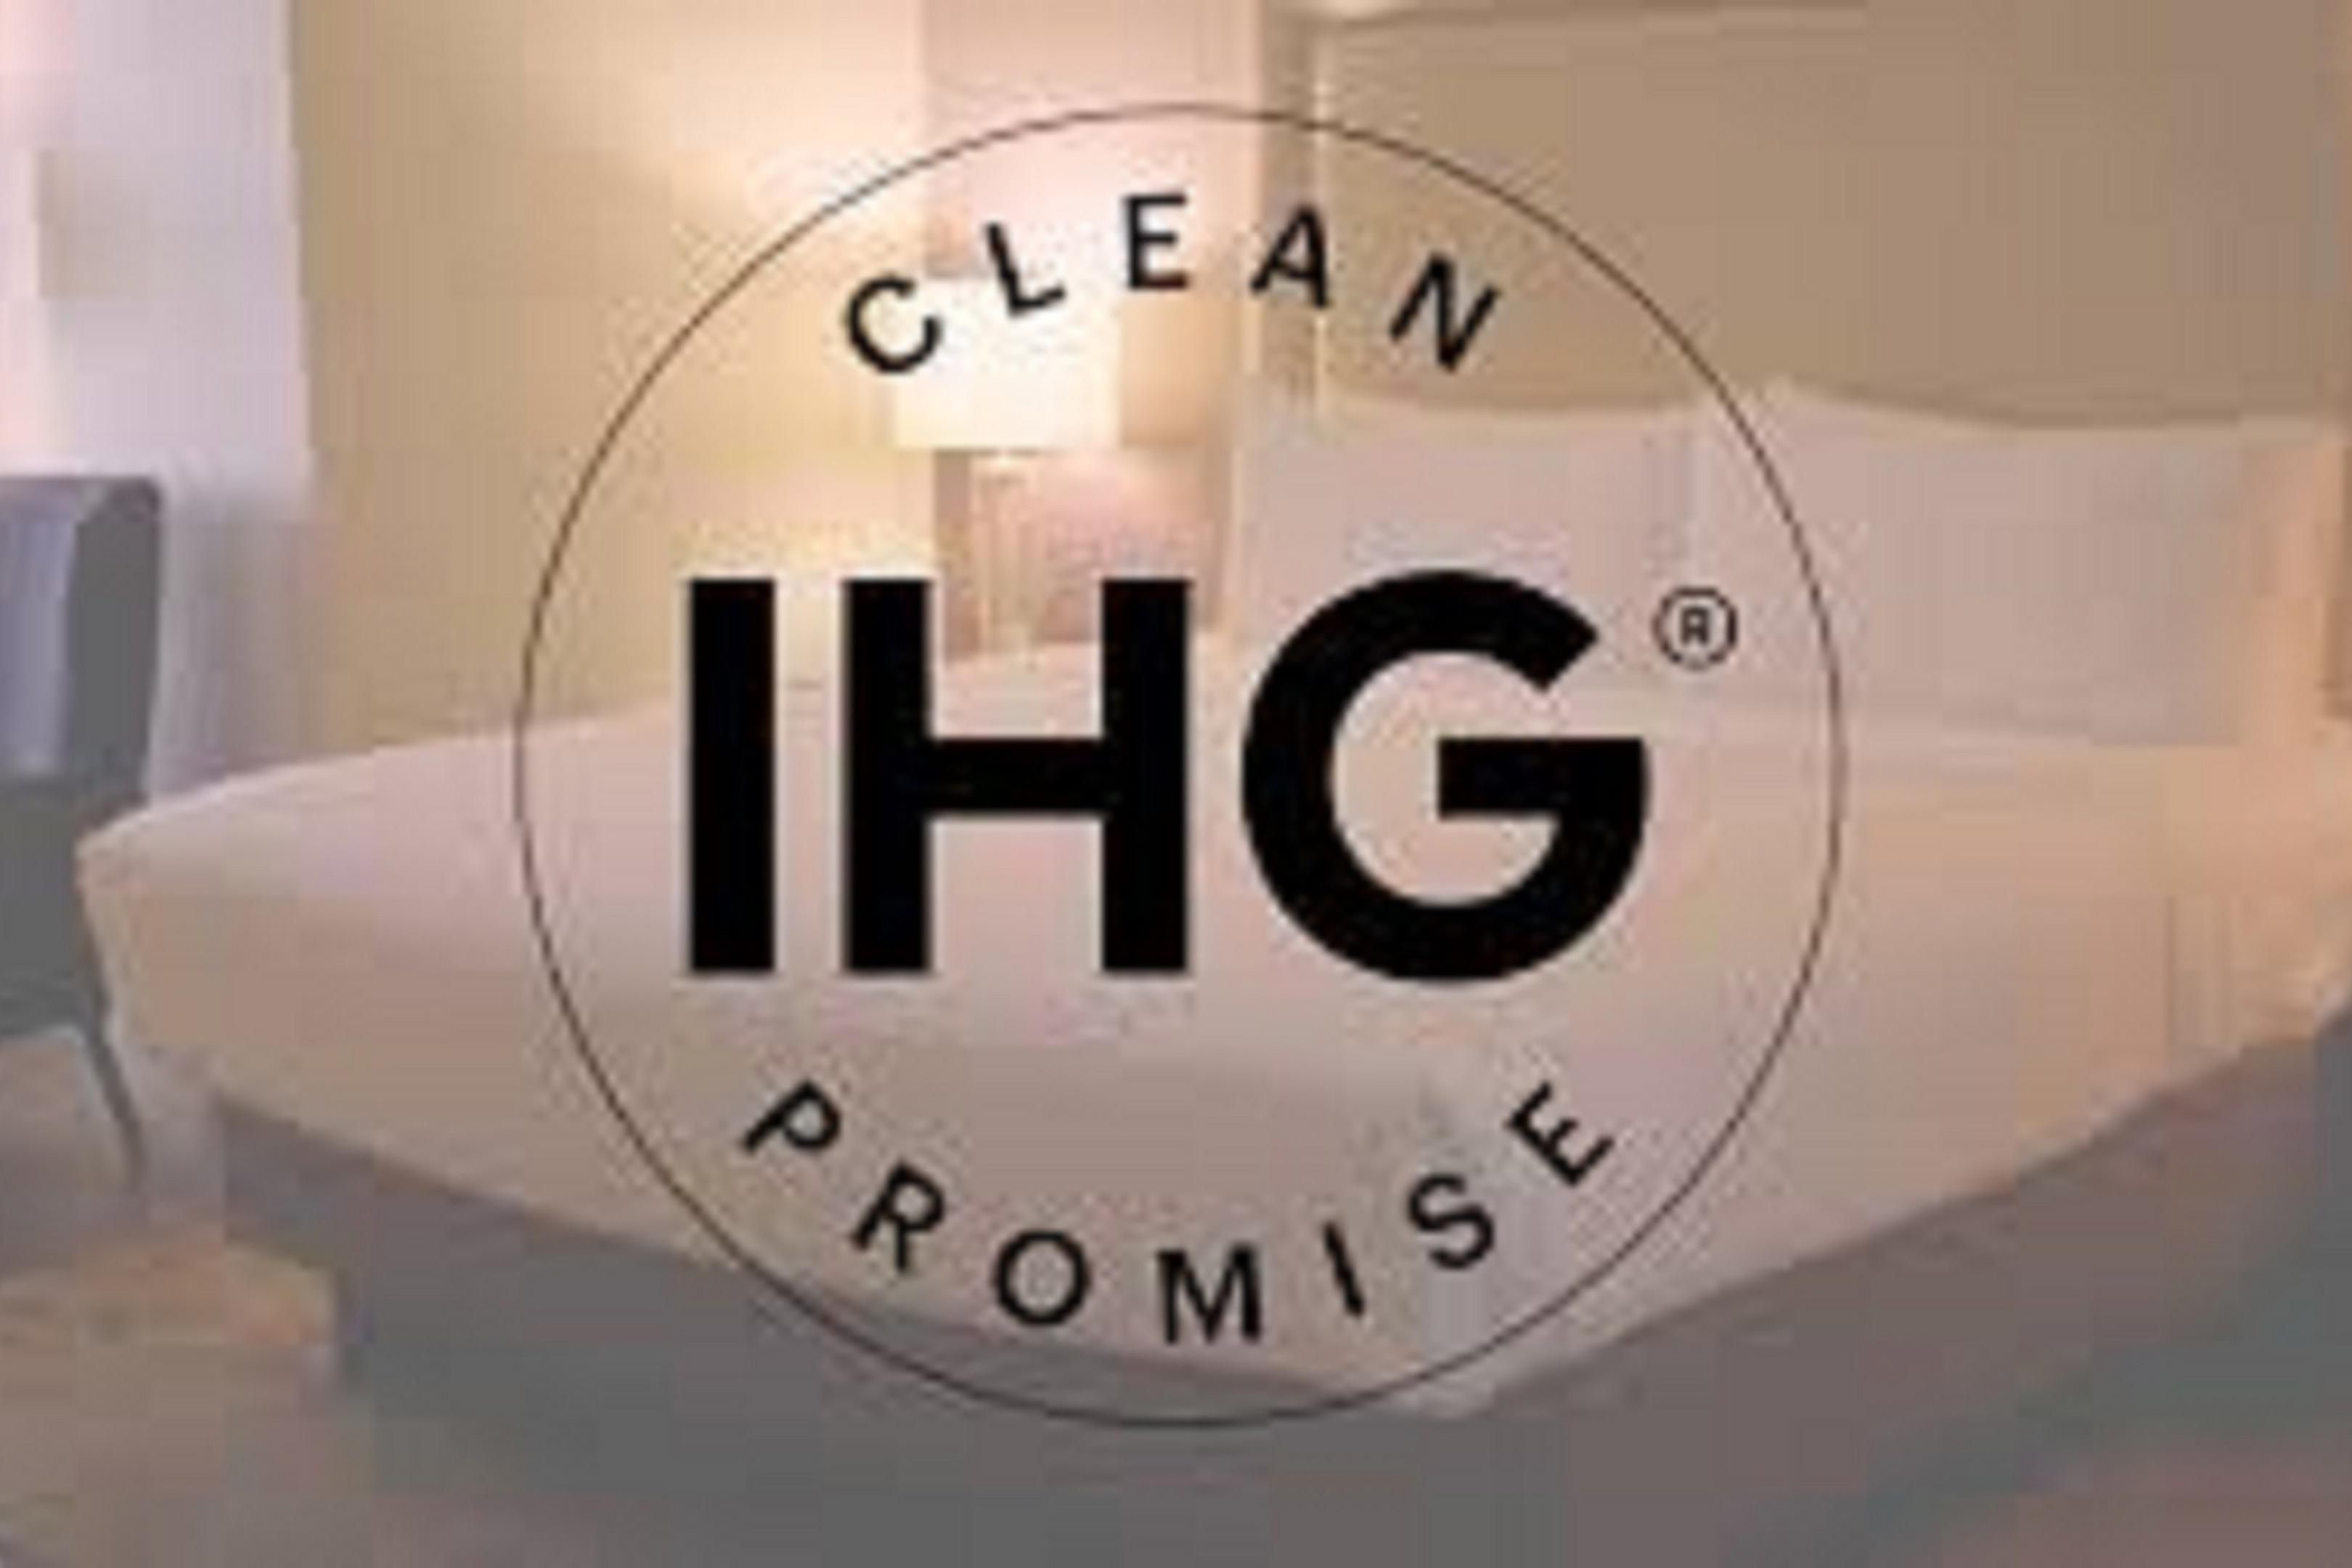 We offer award winning service and have redefined cleanliness to support your wellbeing throughout your stay.  